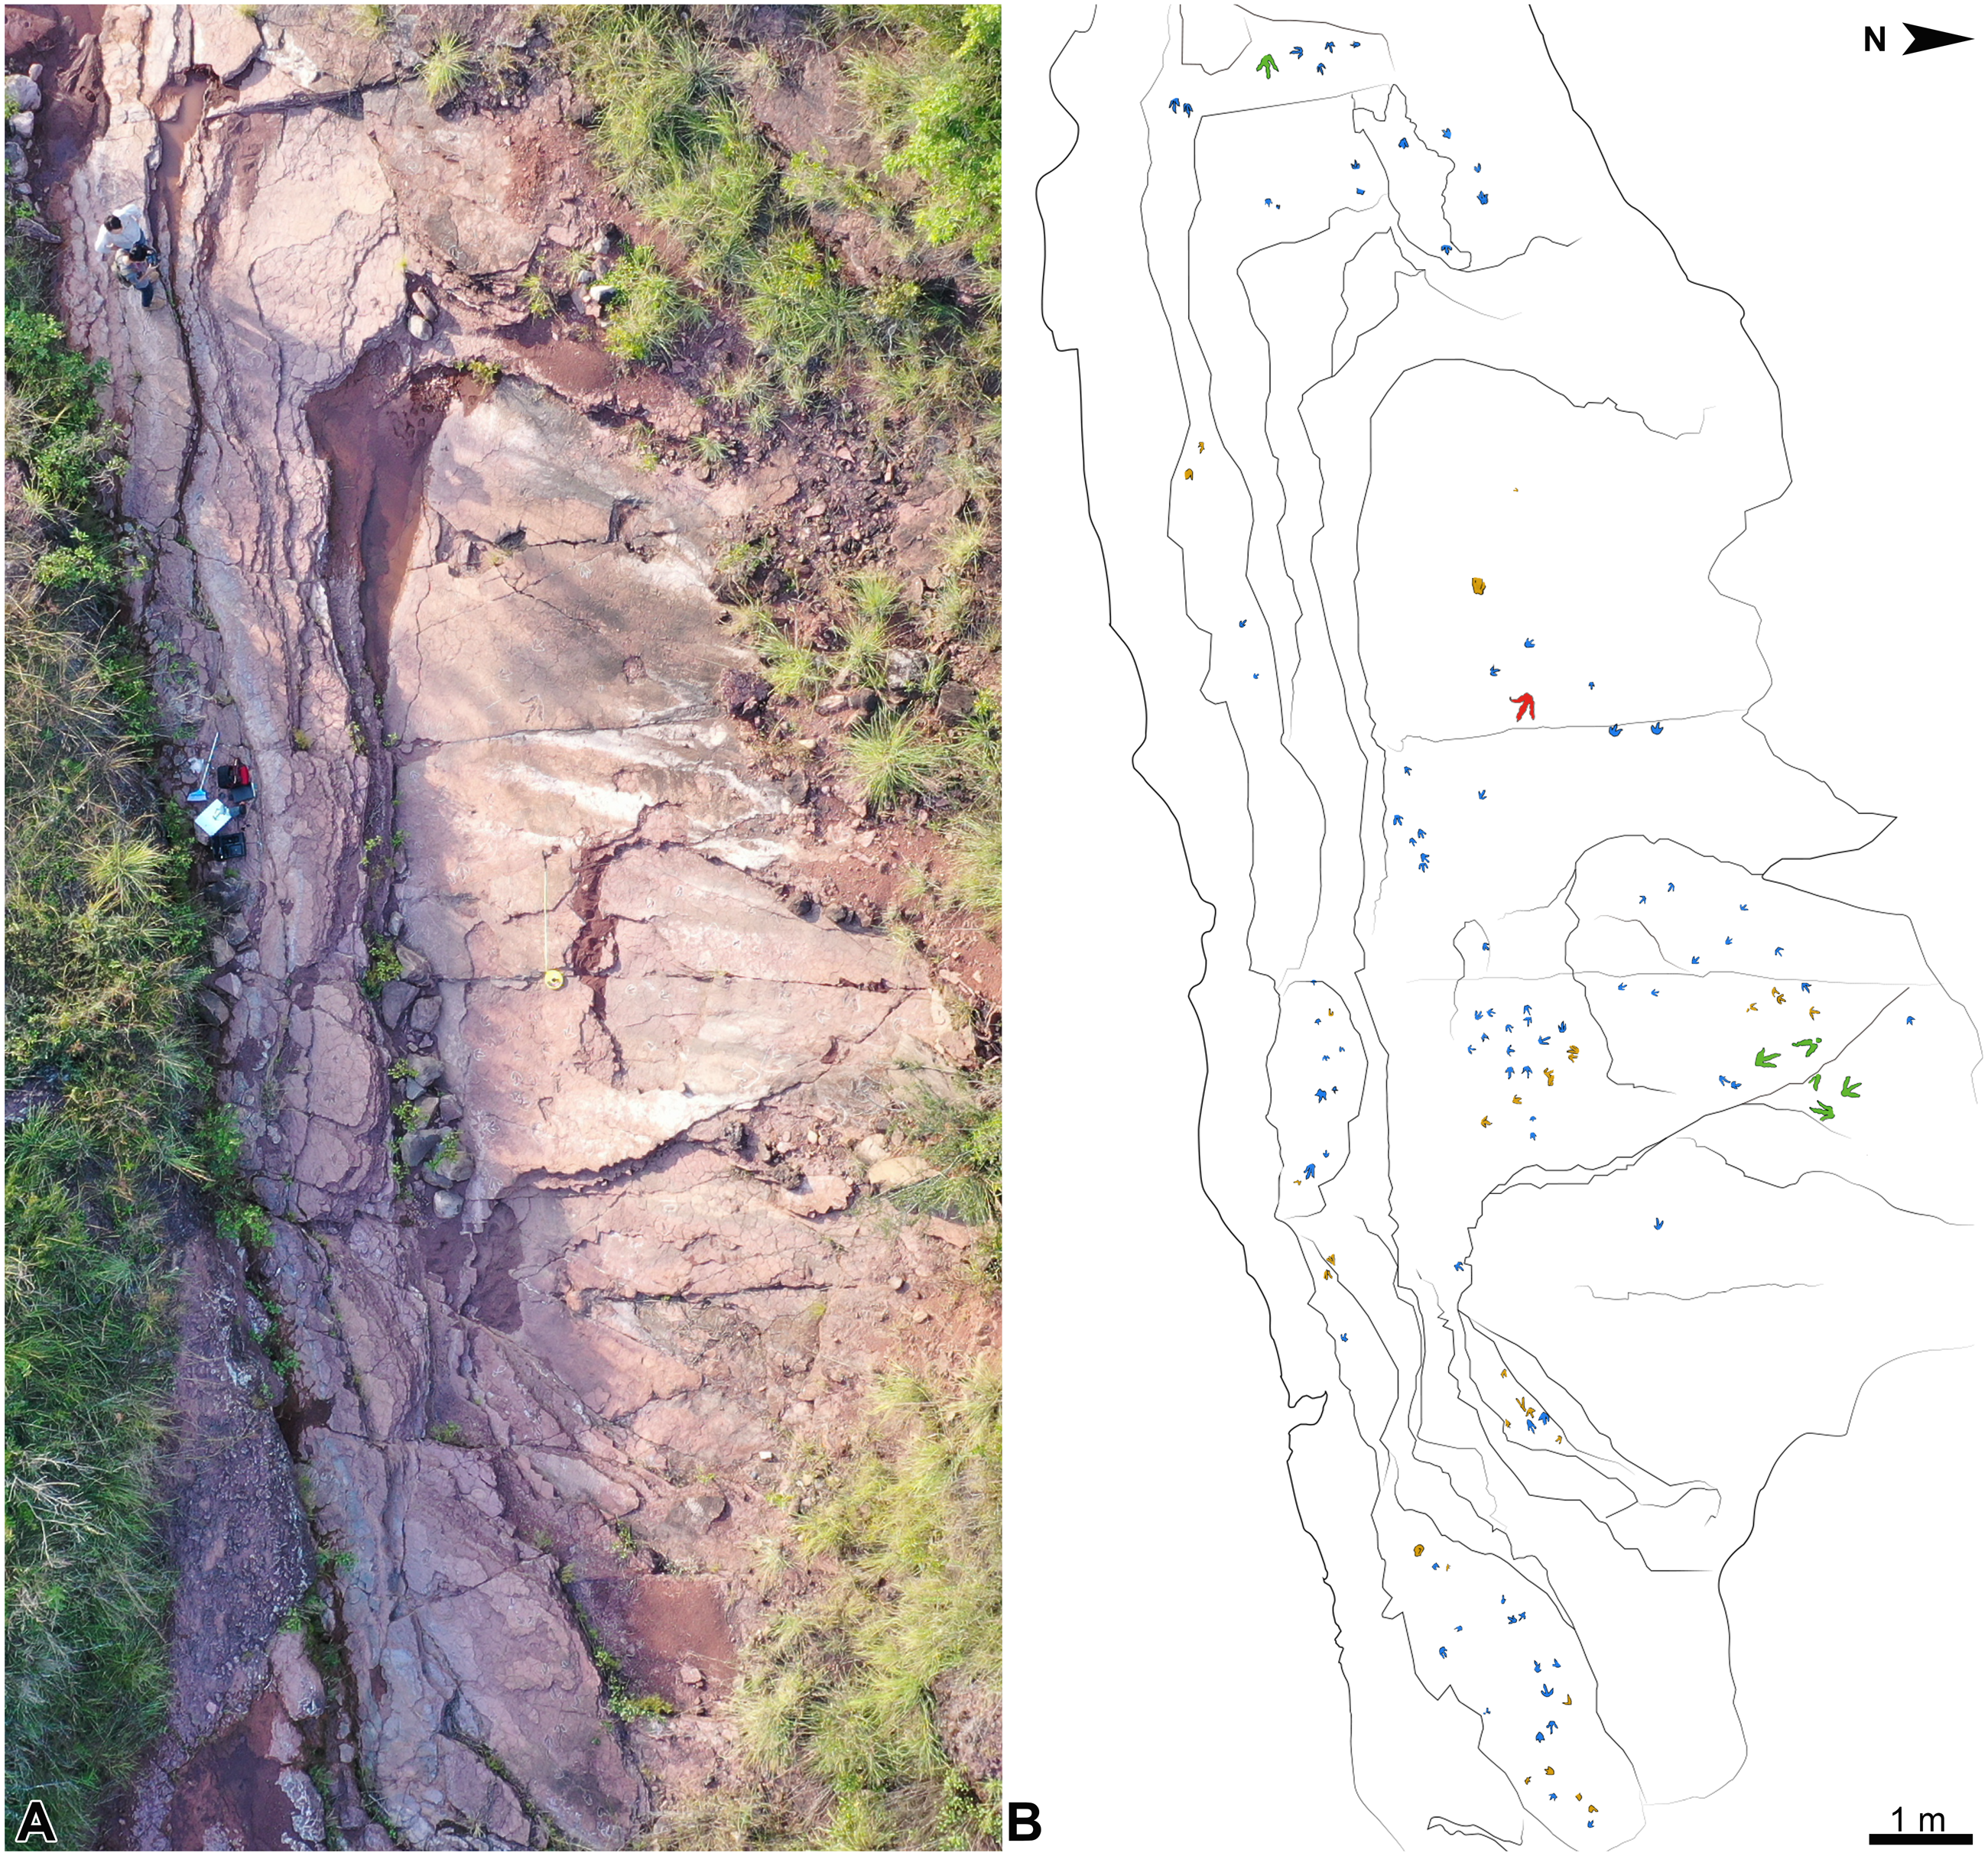 Fast-running theropods tracks from the Early Cretaceous of La Rioja, Spain